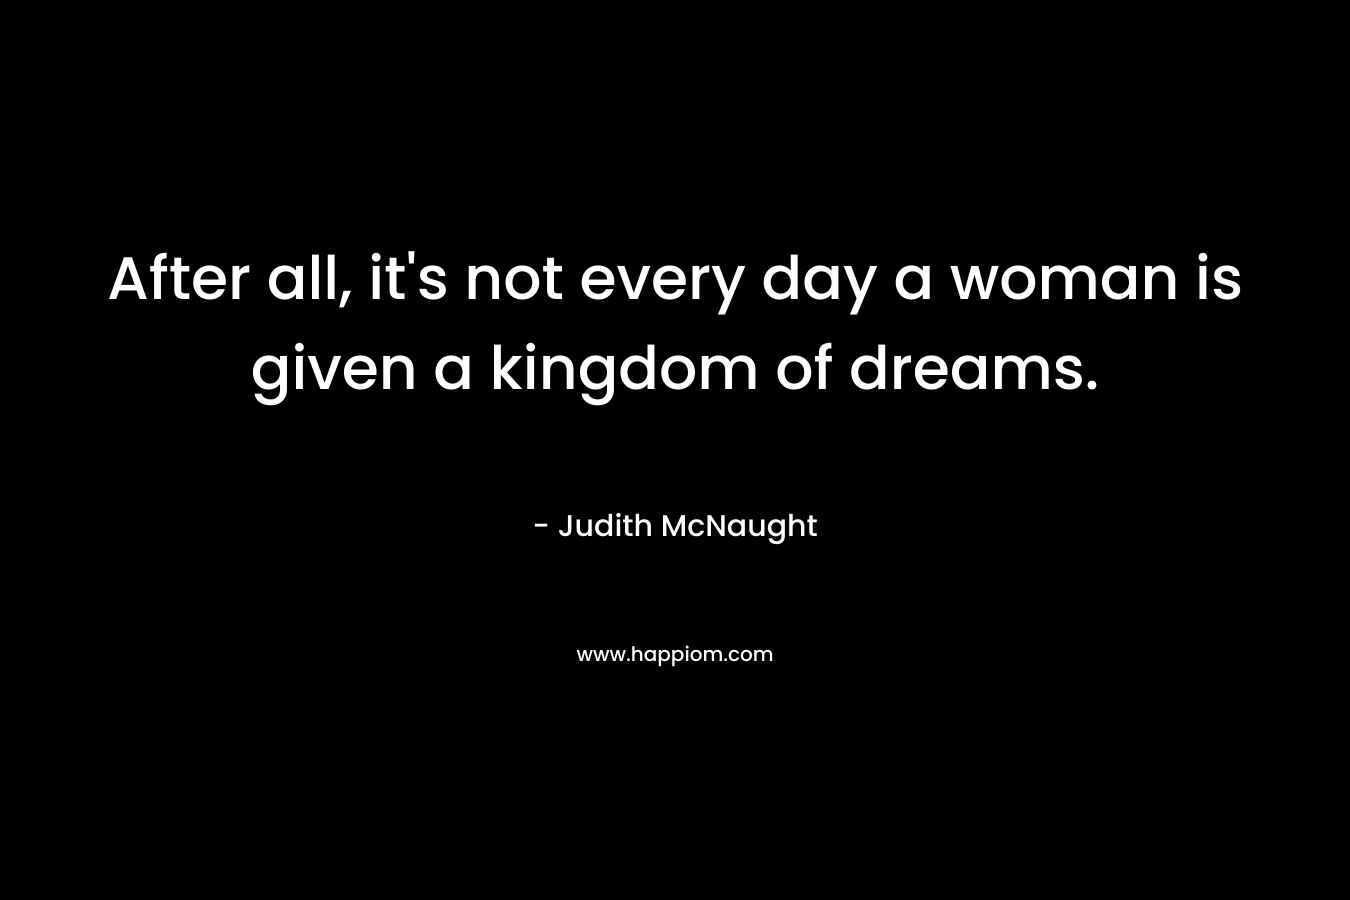 After all, it's not every day a woman is given a kingdom of dreams.